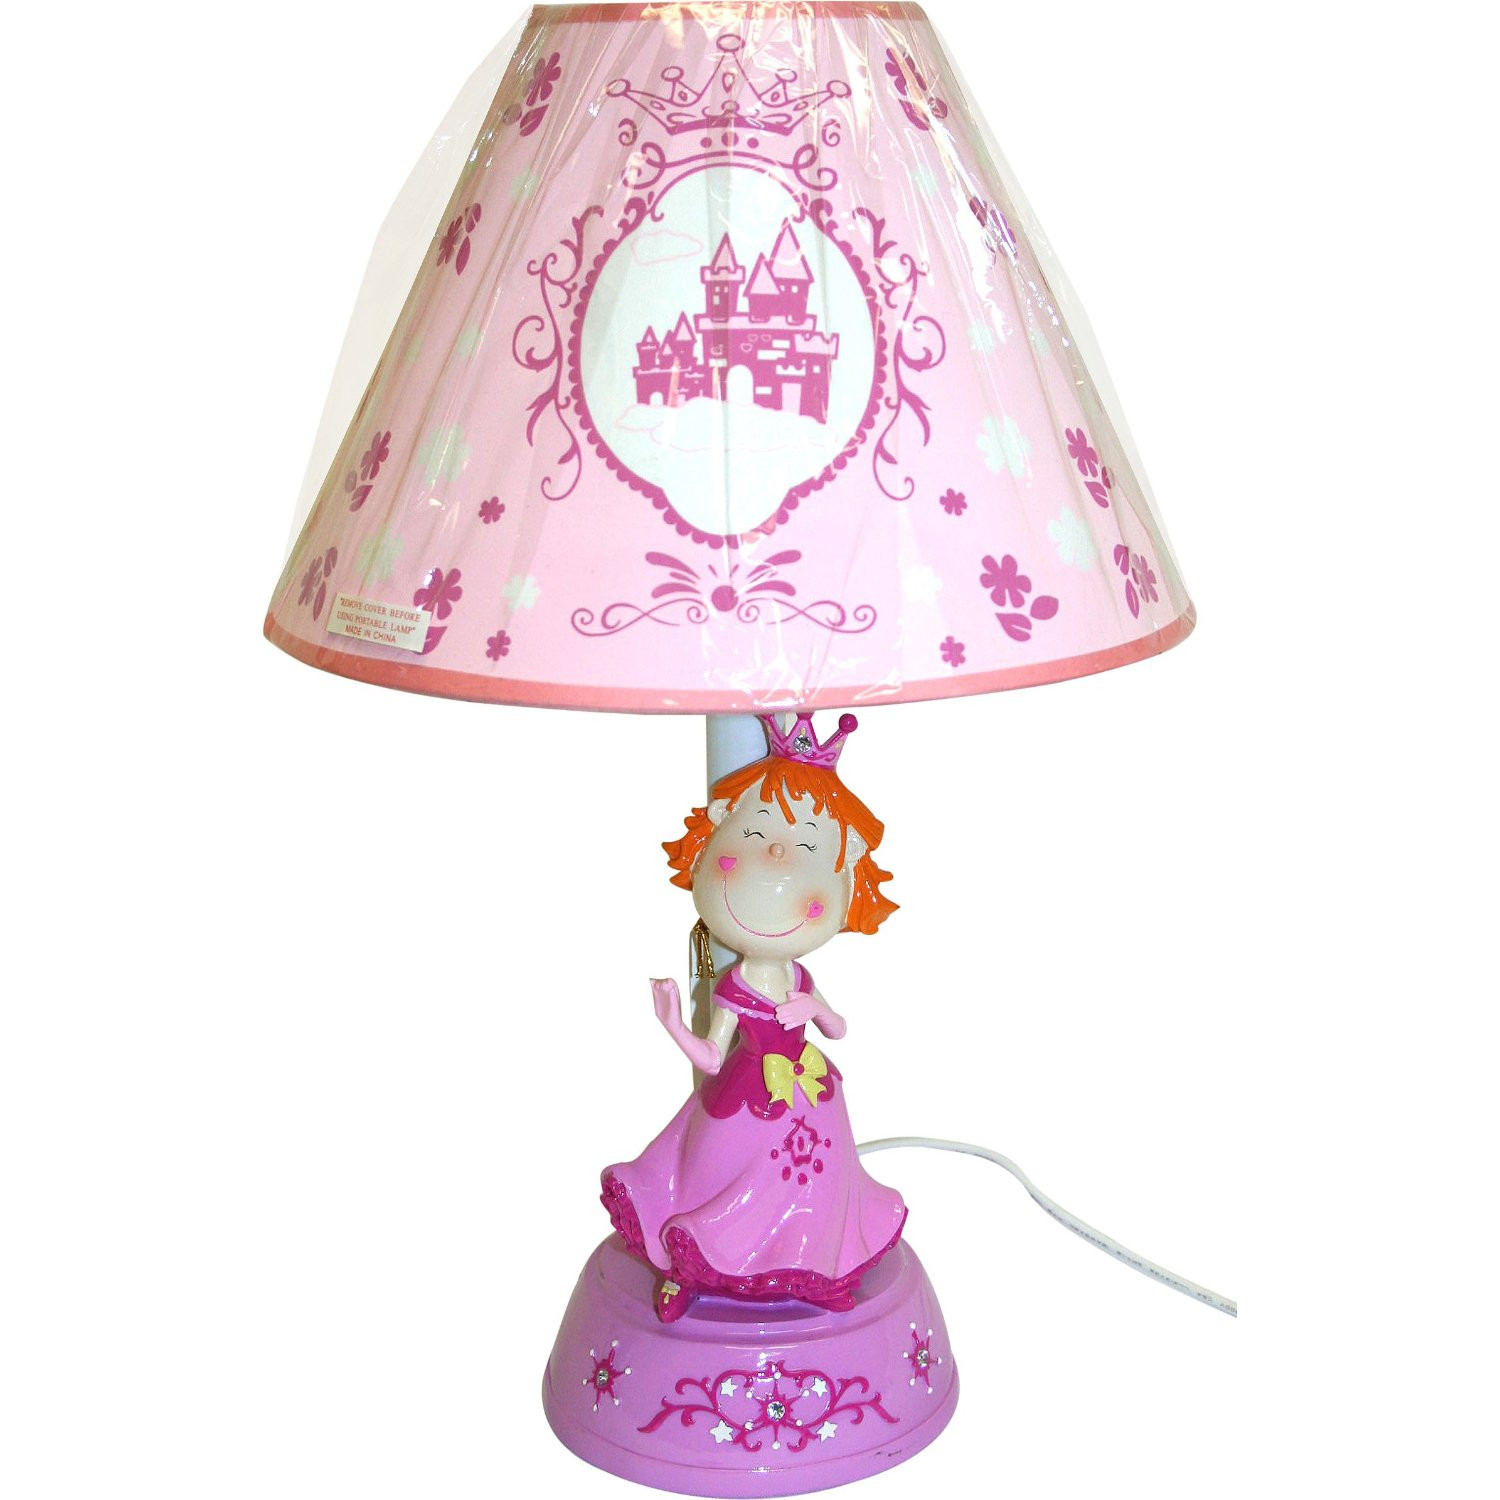 23 Of the Hottest Lamp Shades for Kids Room - Home, Family, Style and